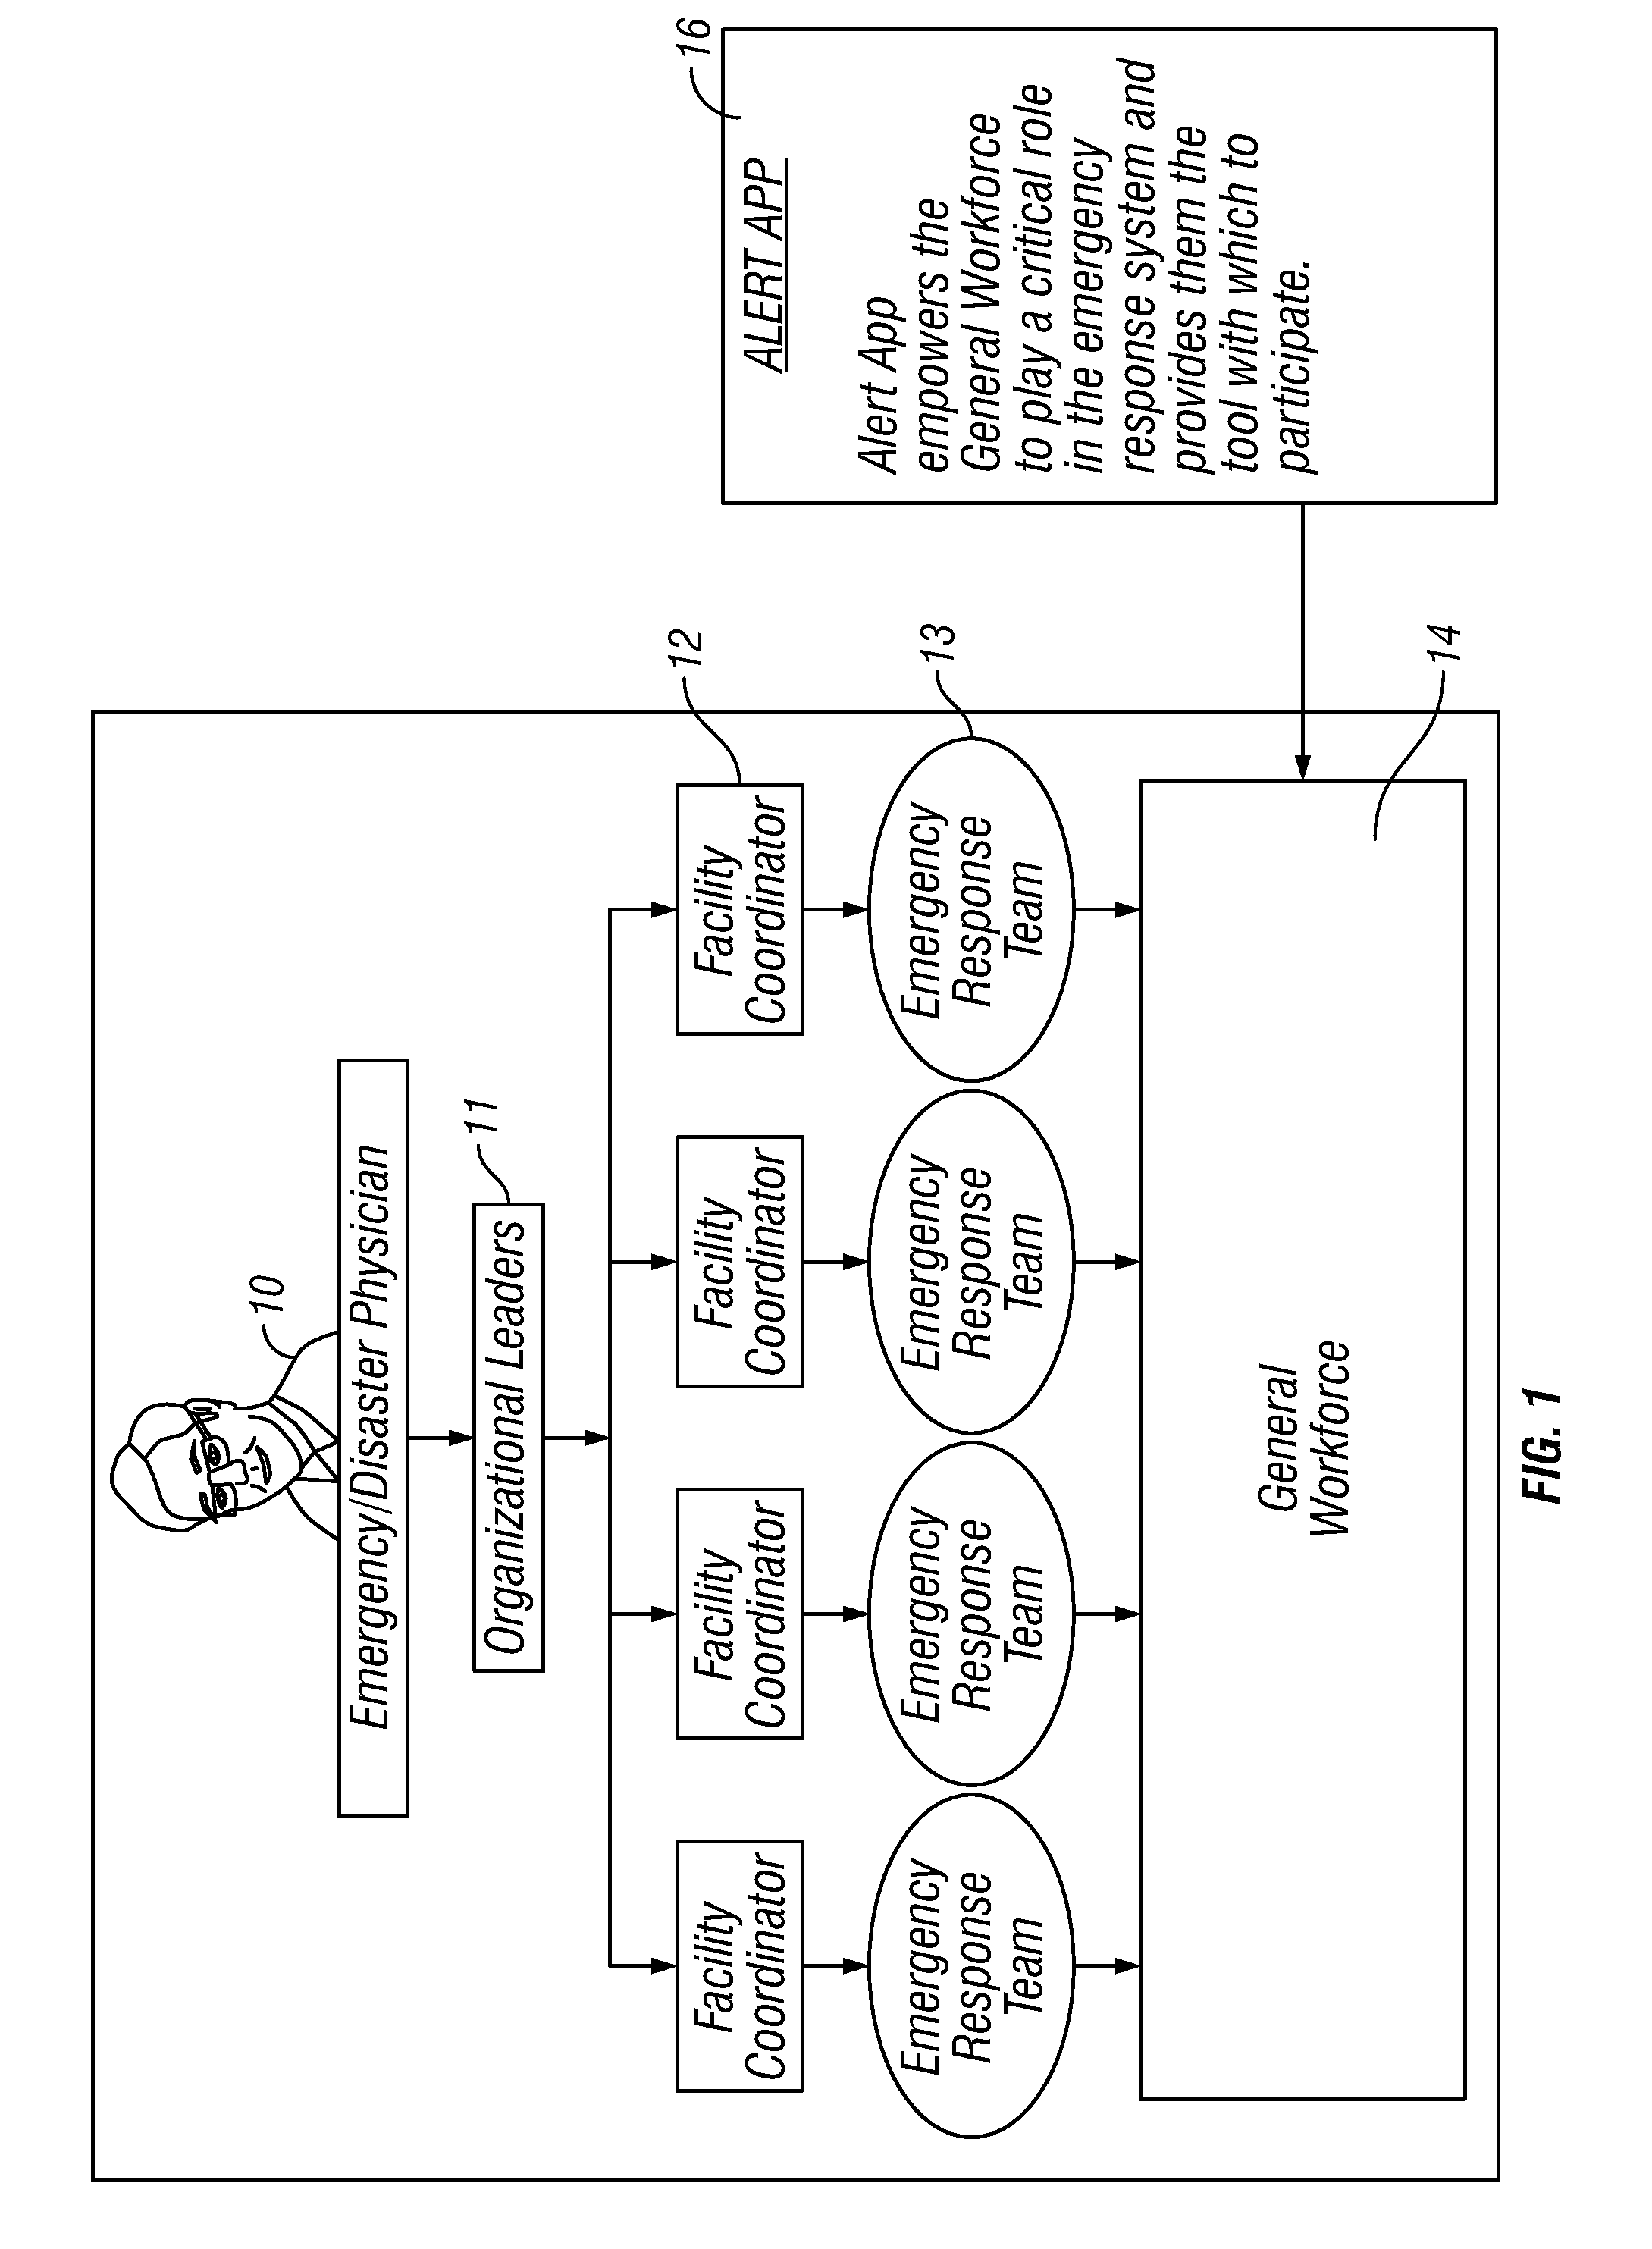 Method and apparatus for emergency response notification